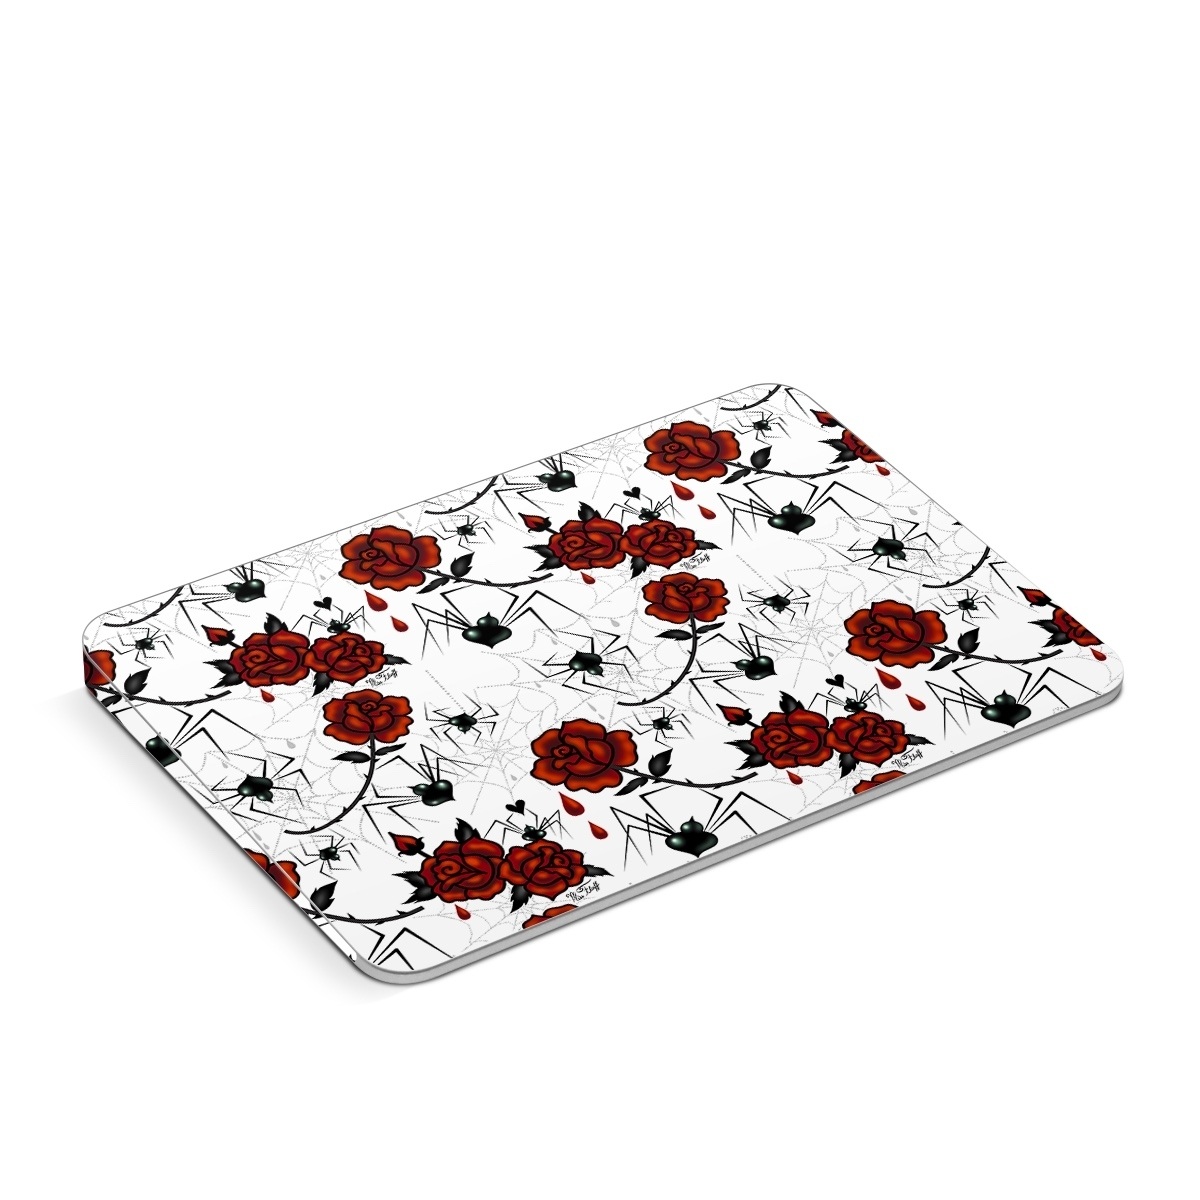 Apple Magic Trackpad Skin design of Red, Pattern, Flower, Plant, Design, Floral design, Petal, Coquelicot, Wildflower, Rose, with black, white, red colors